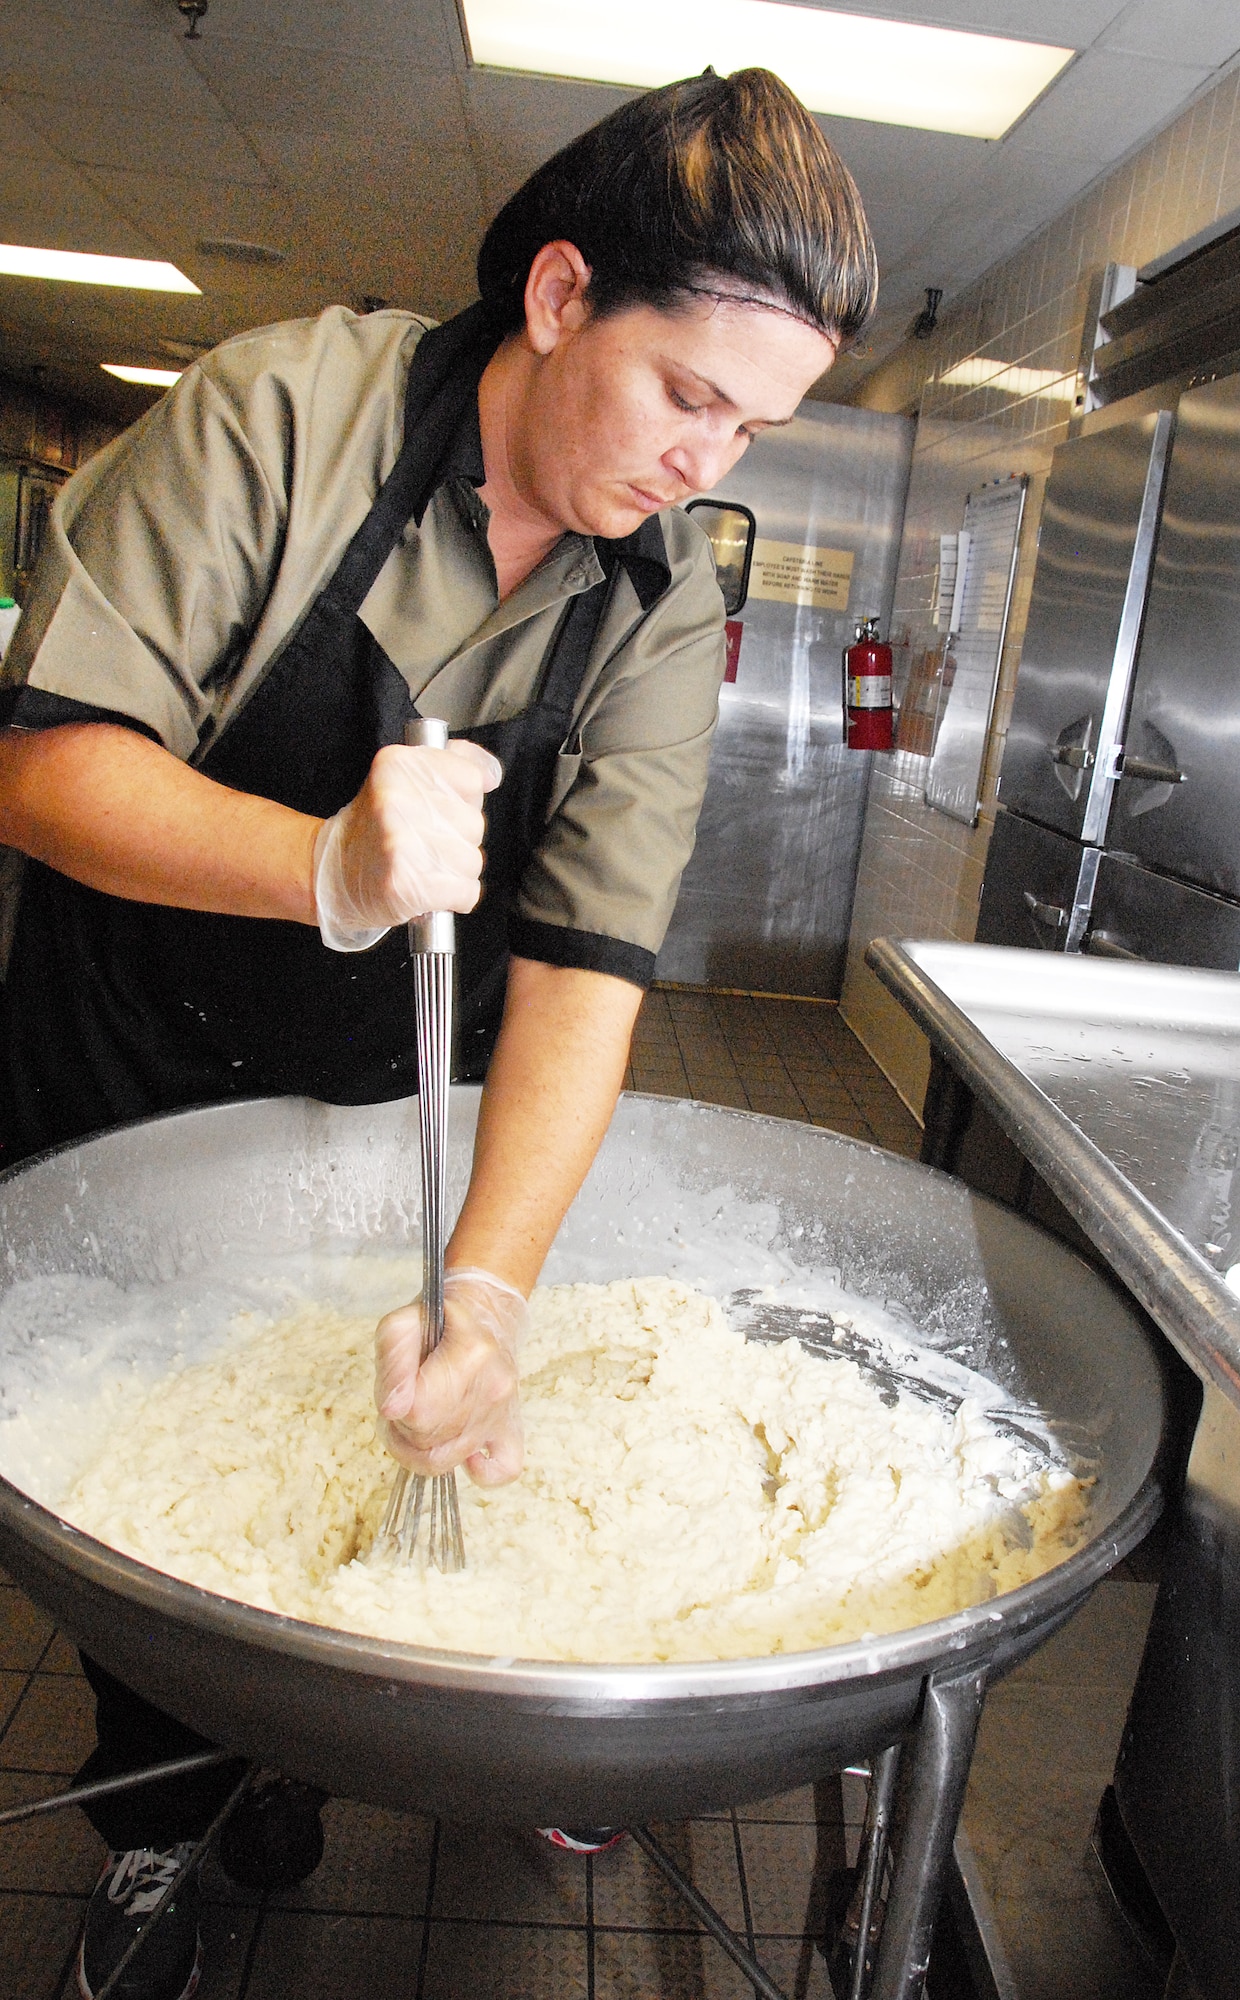 Dana Yearty, food service worker, prepares mashed potatoes for lunch at the base restaurant. (U. S. Air Force photo/Misuzu Allen)